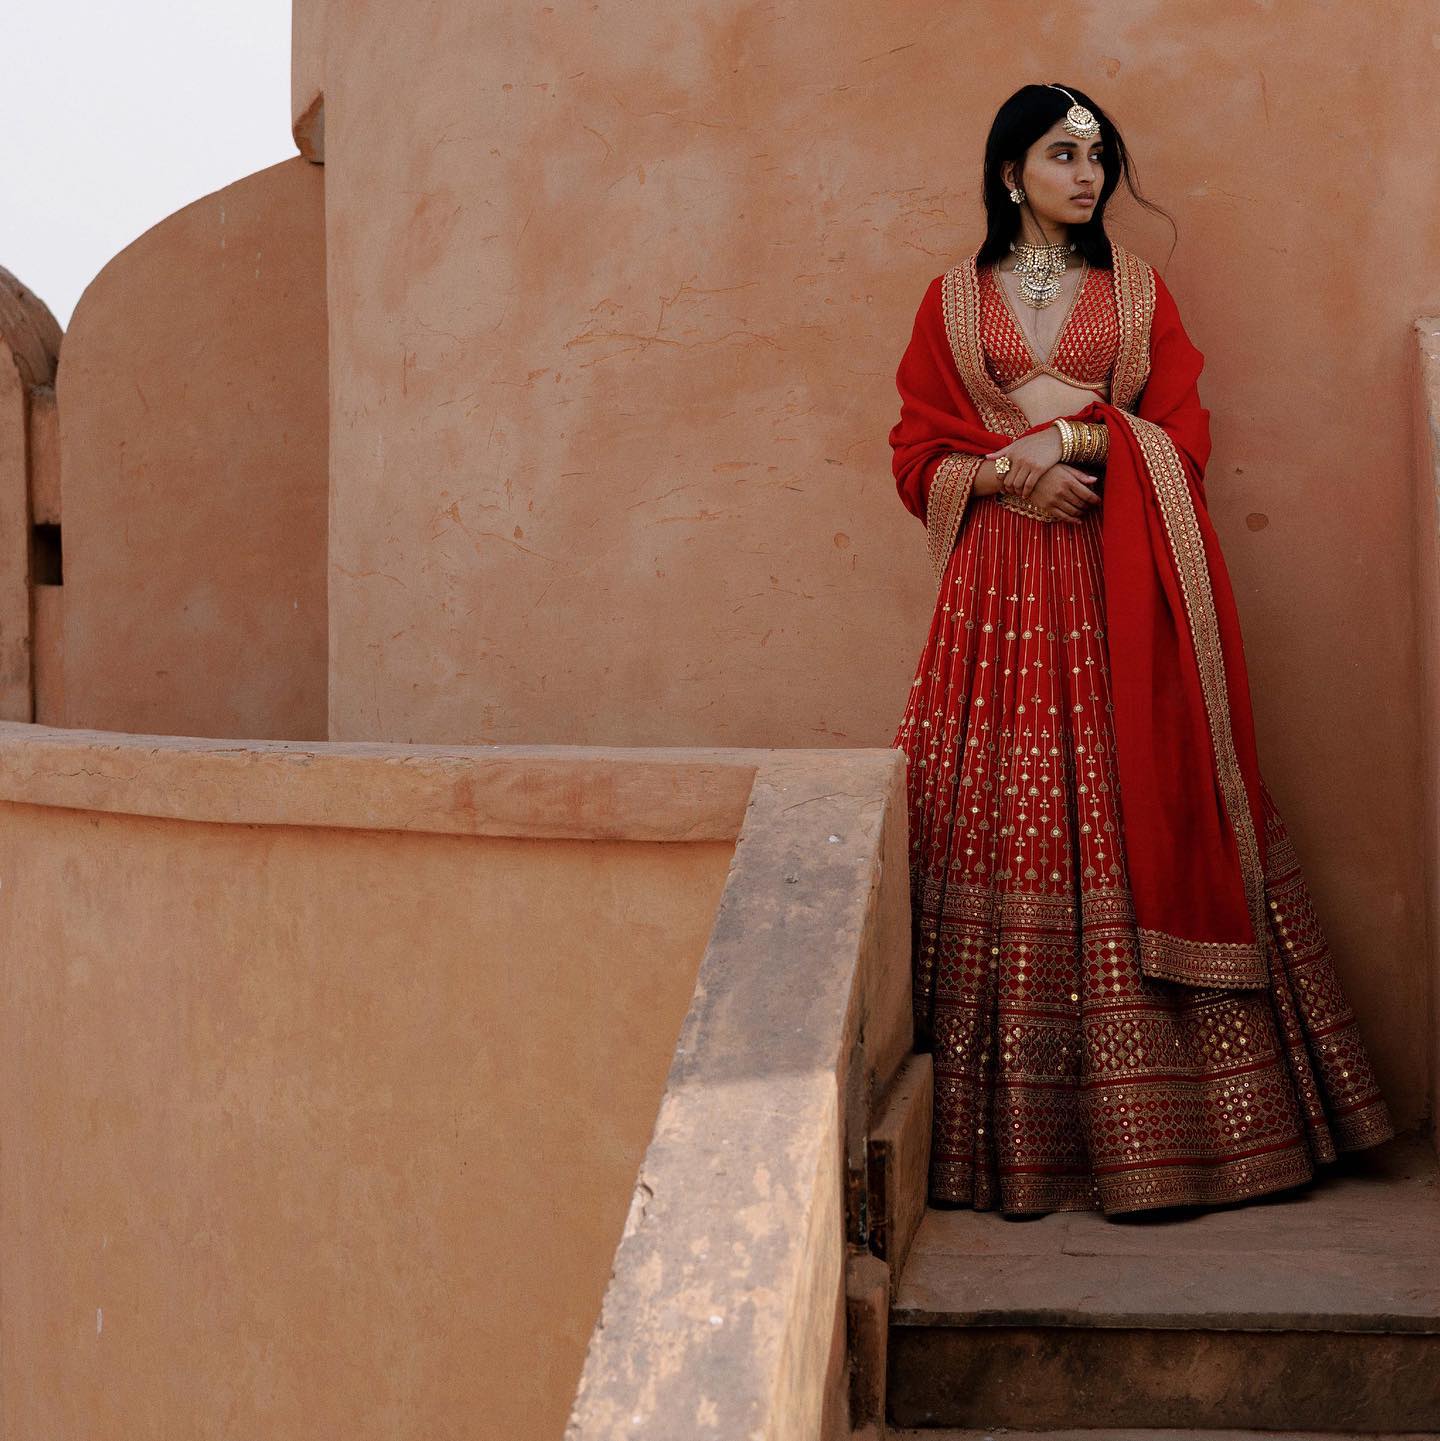 Sabyasachi Spring-Summer Collection Is Here To Give You All The Feels